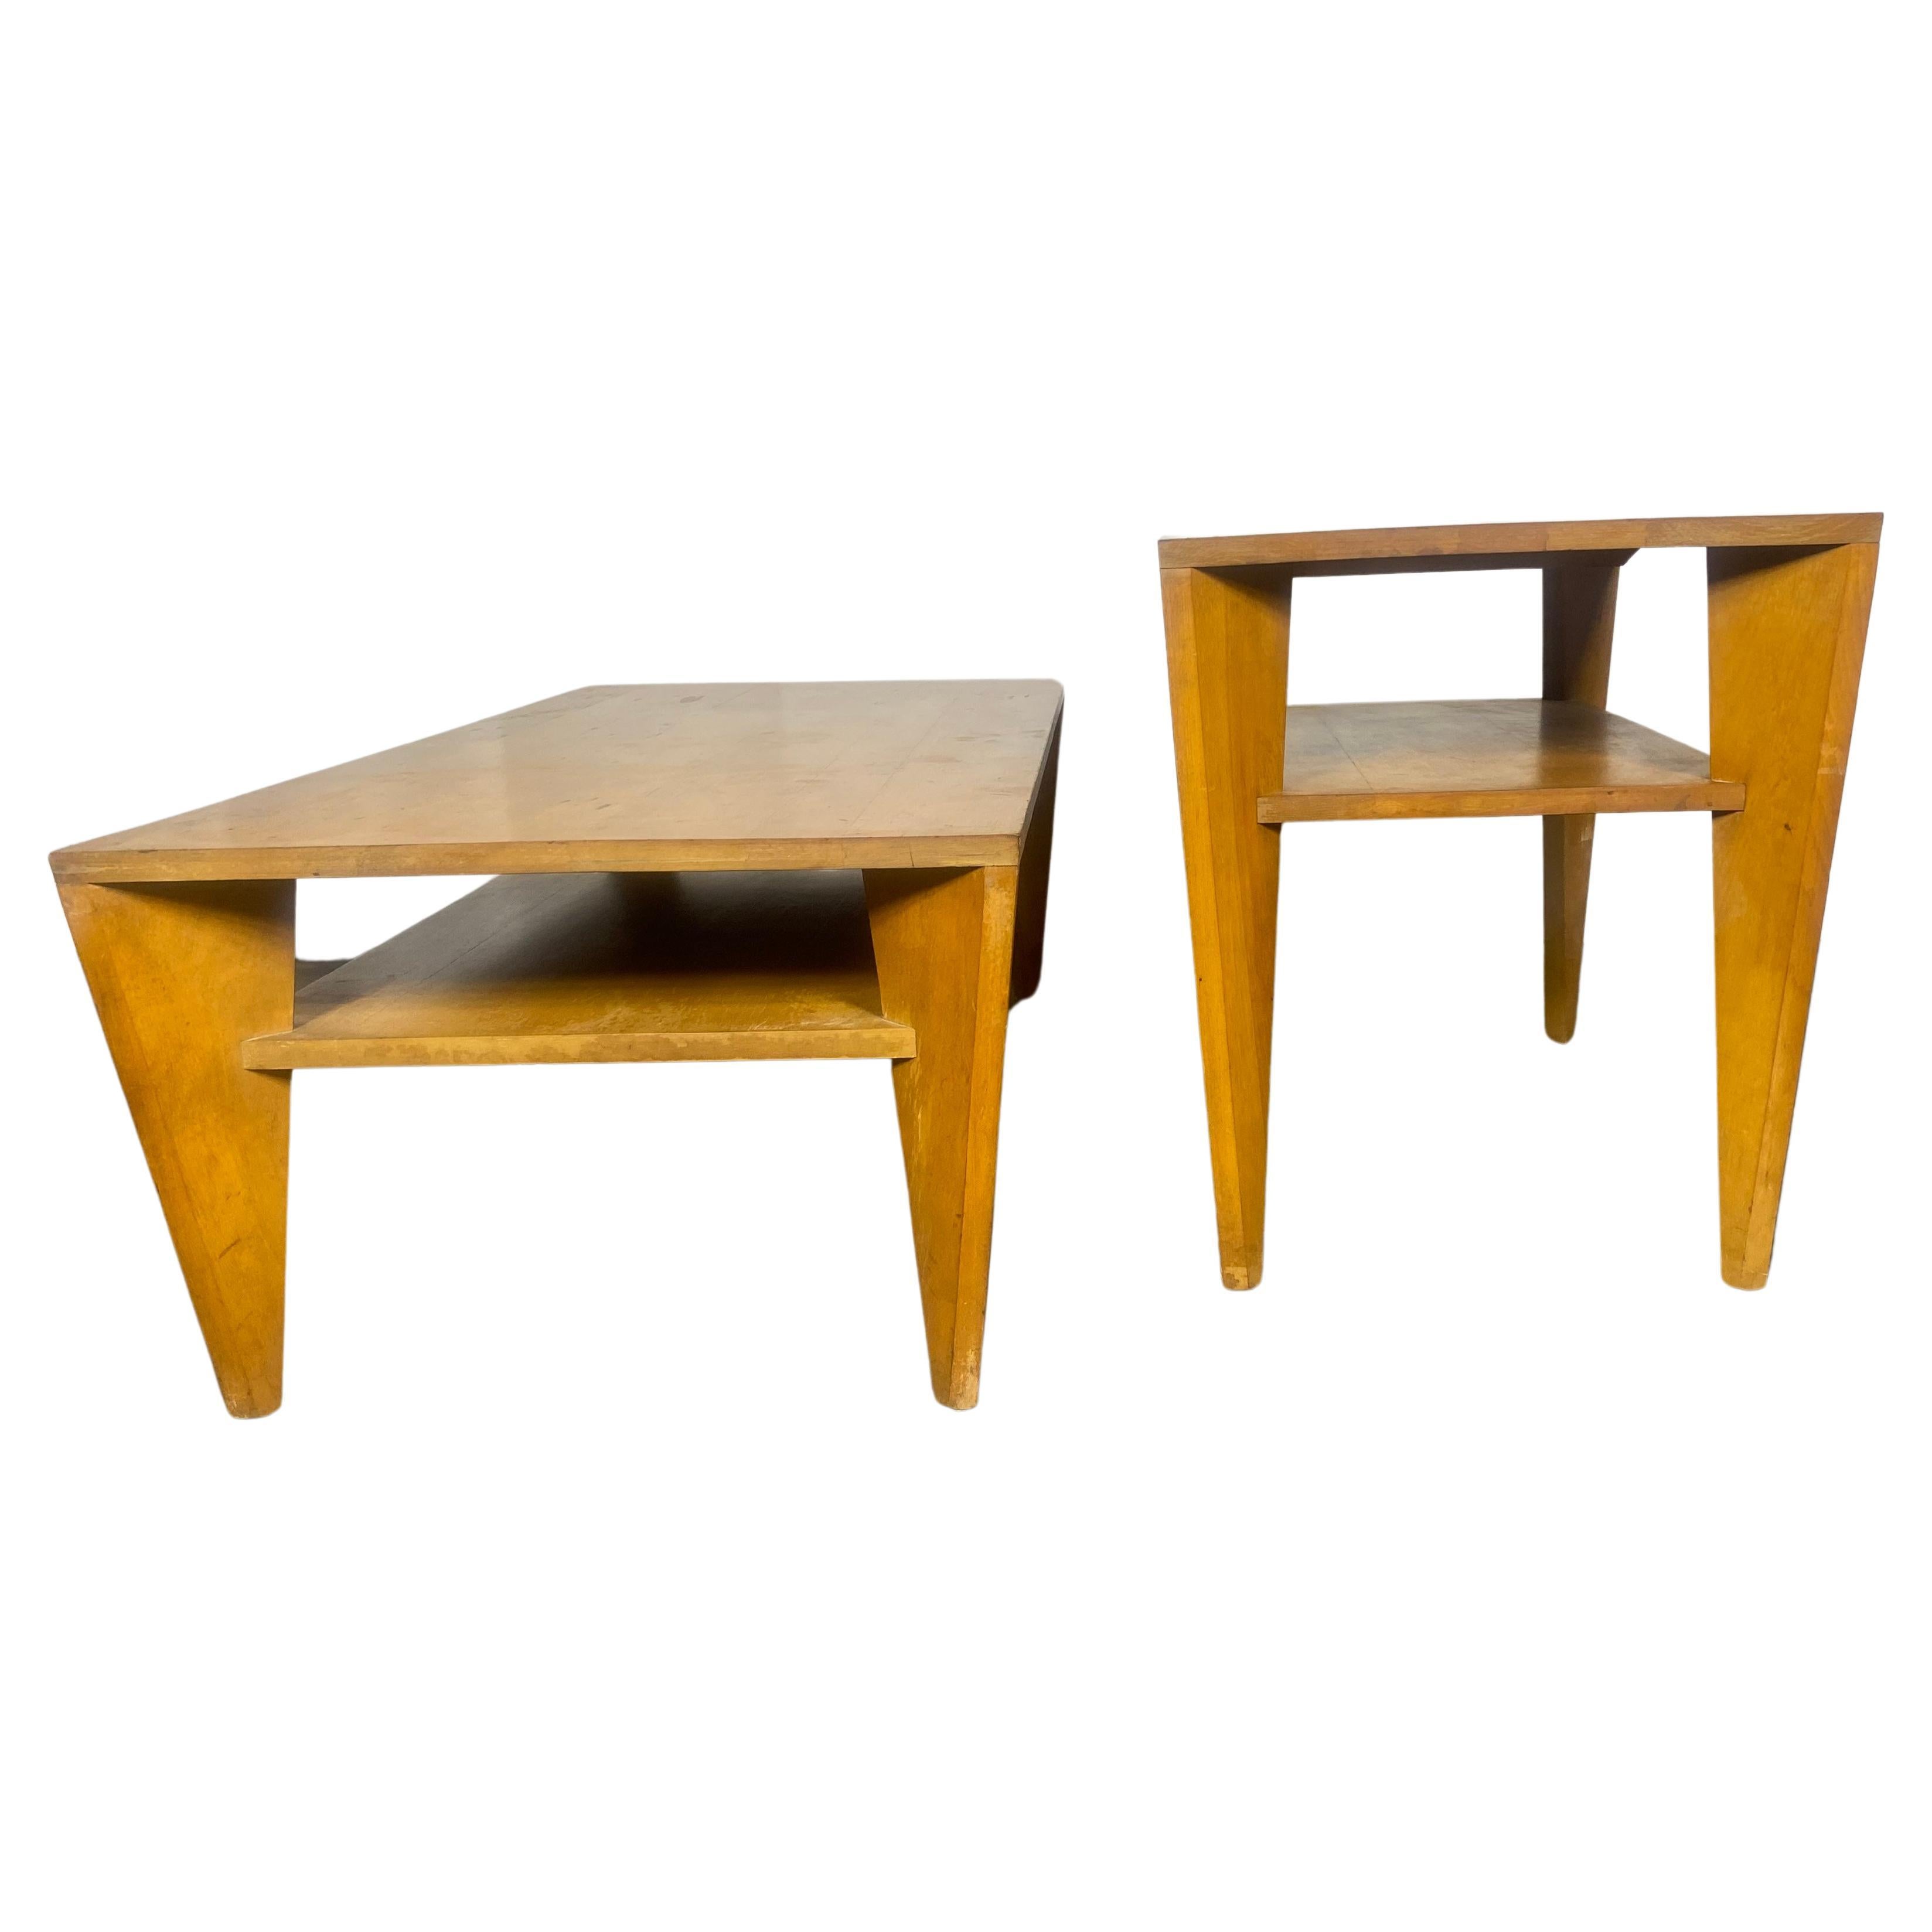 Russel Wright for Conant Ball Solid Maple Coffee and Side Table, Classic Modern